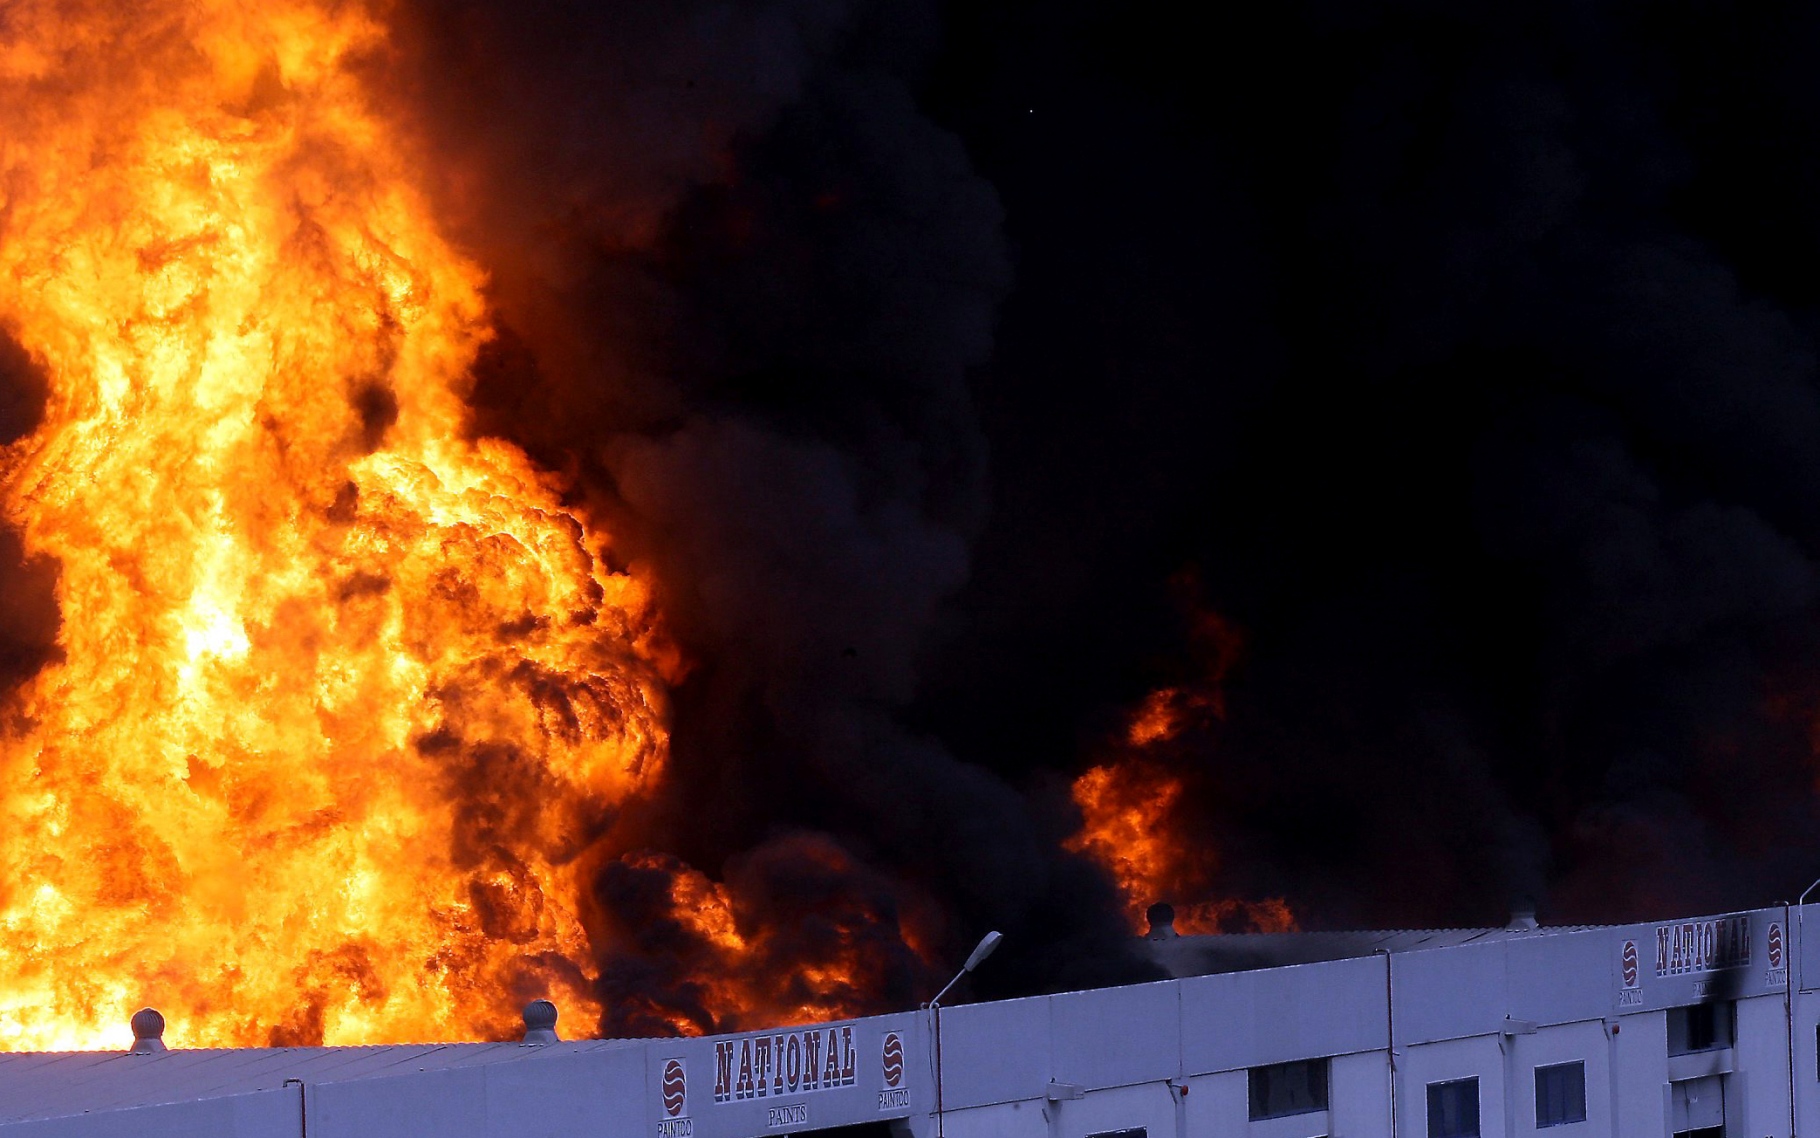 A massive fire breaks out at the National Paints Factory in Sharjah. Almost all roads leading to Dubai and Ajman from Sharjah have been closed due to safety measures, May 11, 2010. (SATISH KUMAR)